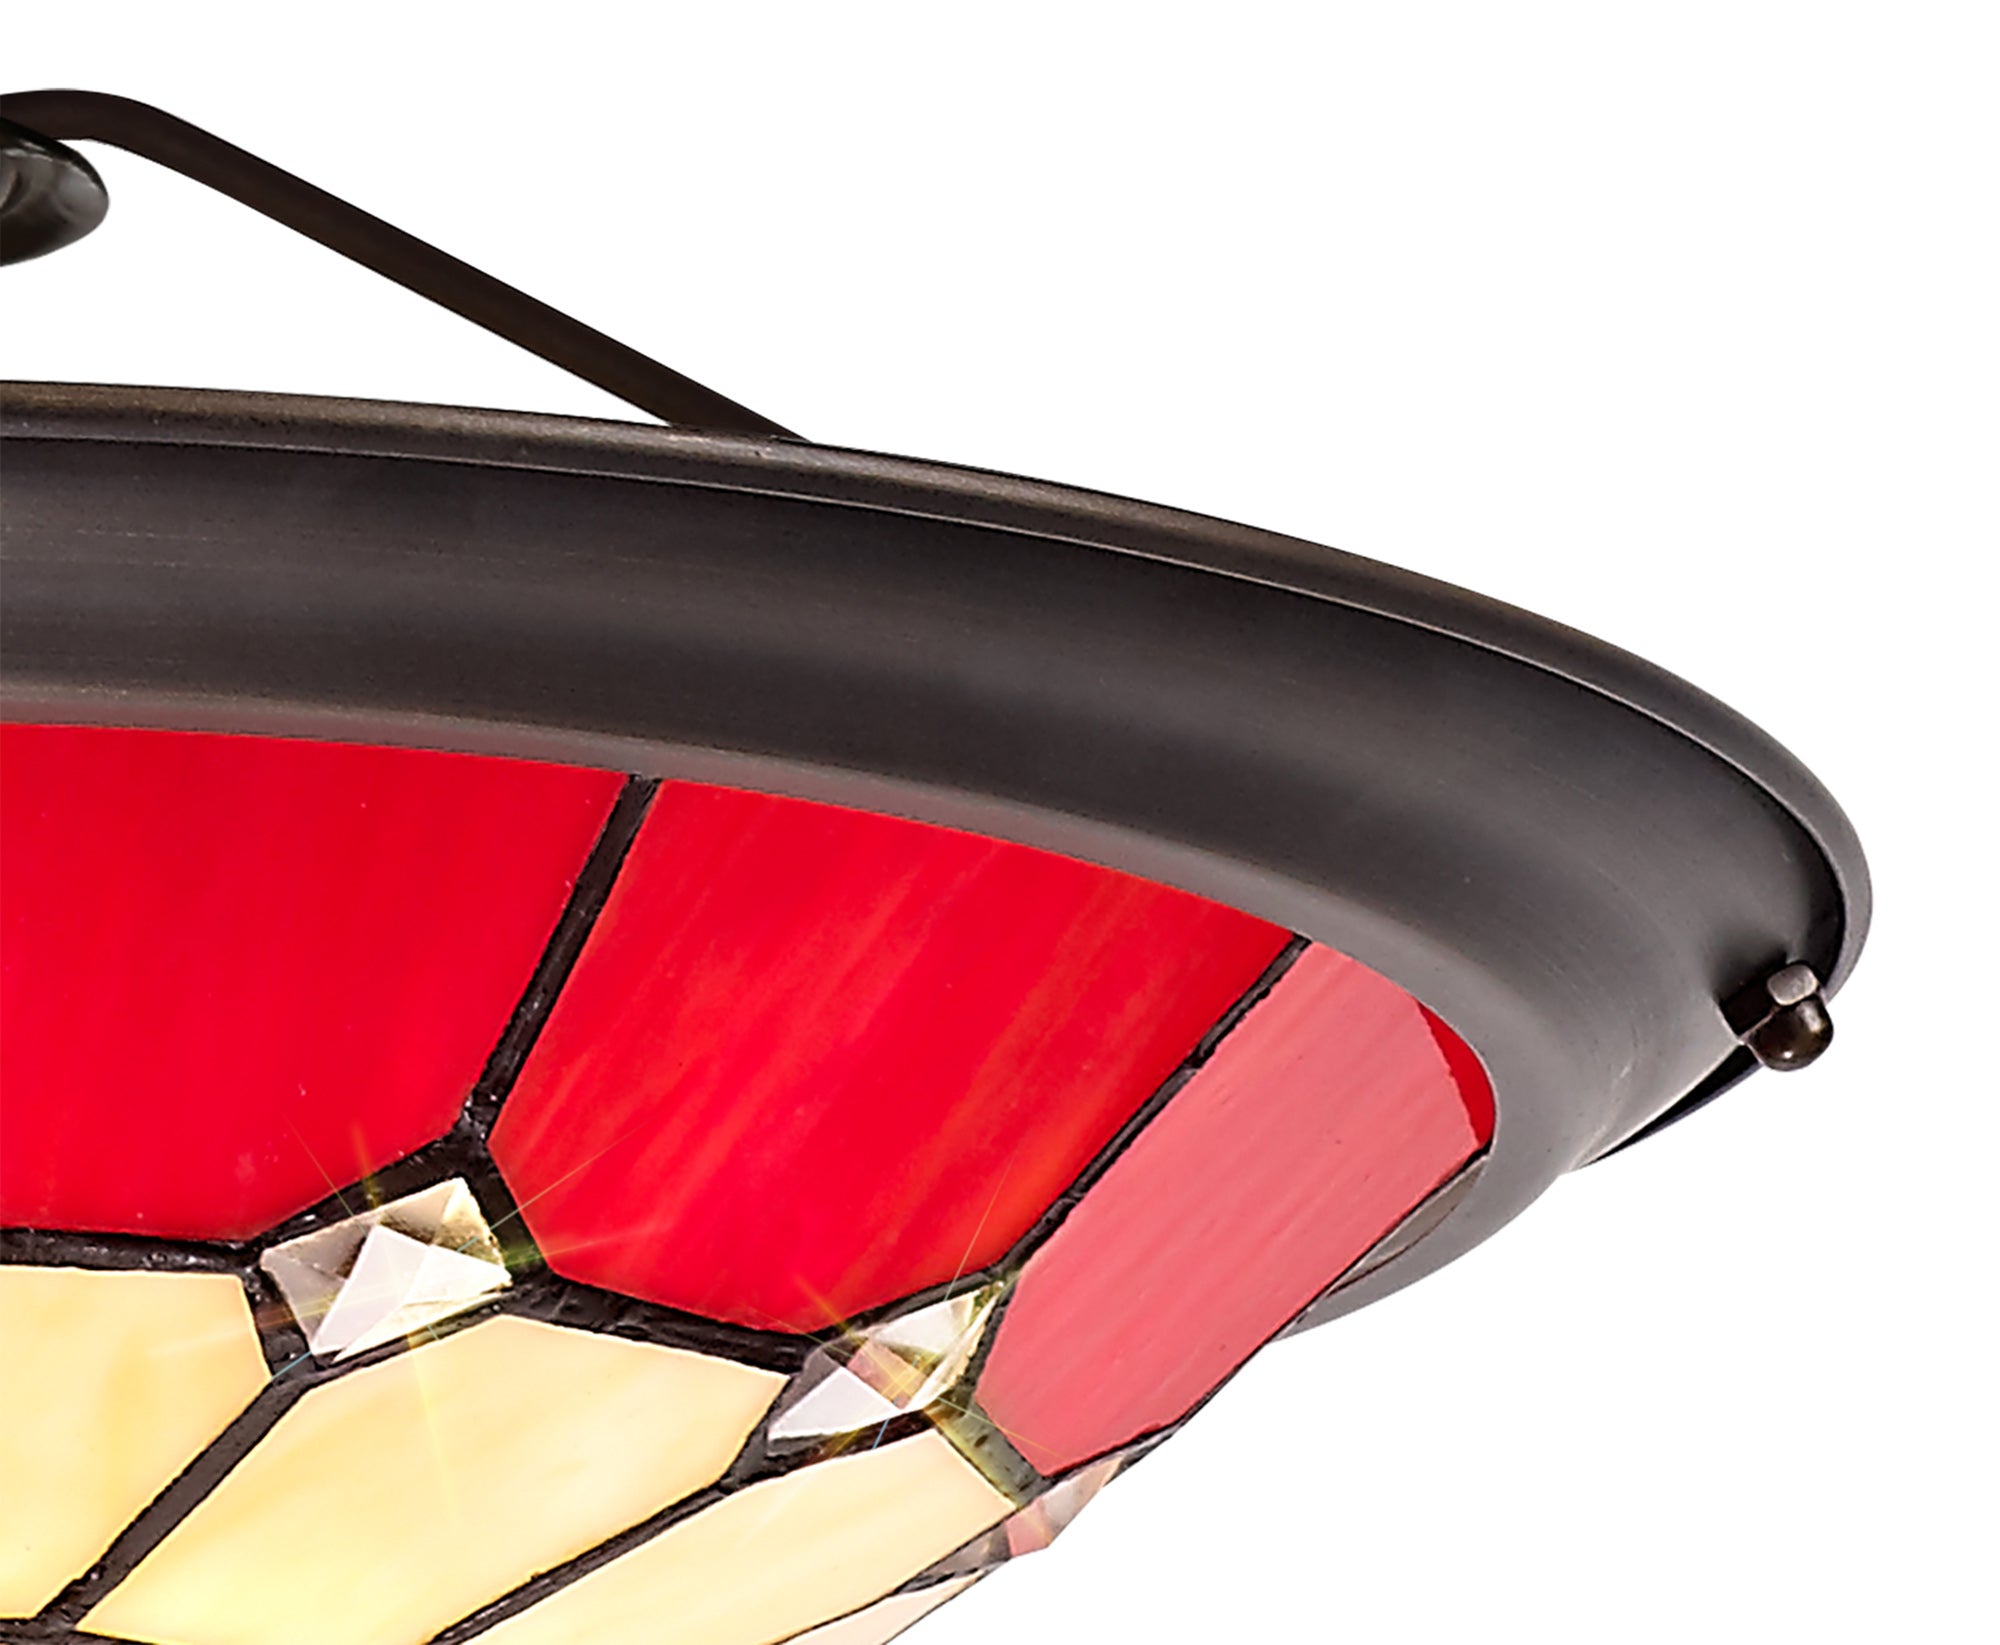 Austiffany, Tiffany 35cm Non-electric Uplighter Shade, Crealm/Red/Clear Crystal Centre/Aged Antique Brass Trim